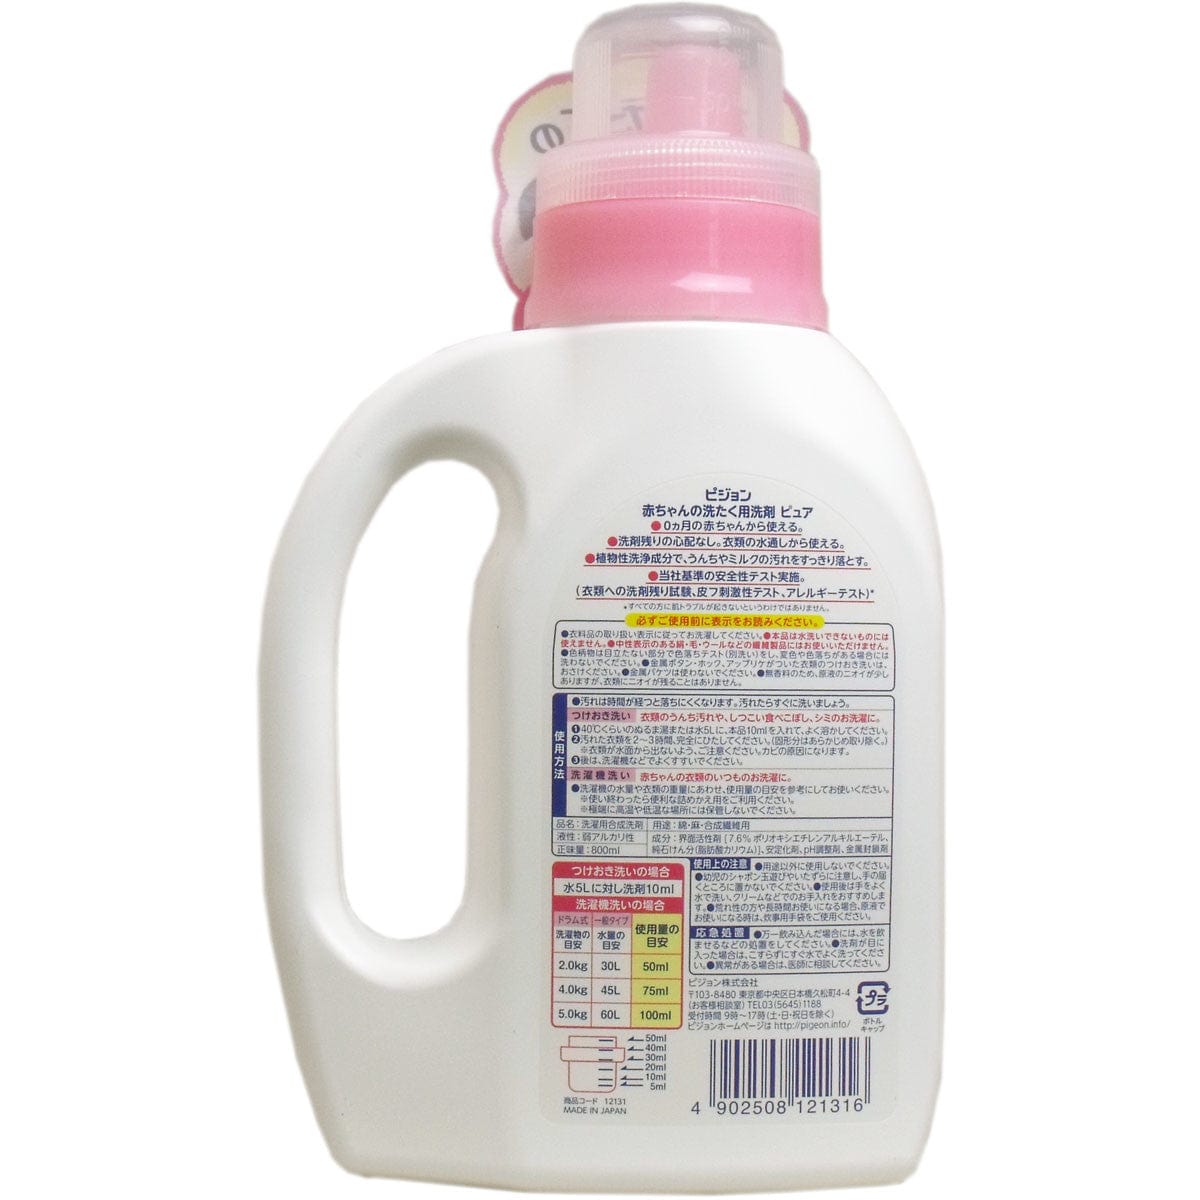 Pigeon Baby Bottle and Vegetable Washing Liquid 800 ml - The Best